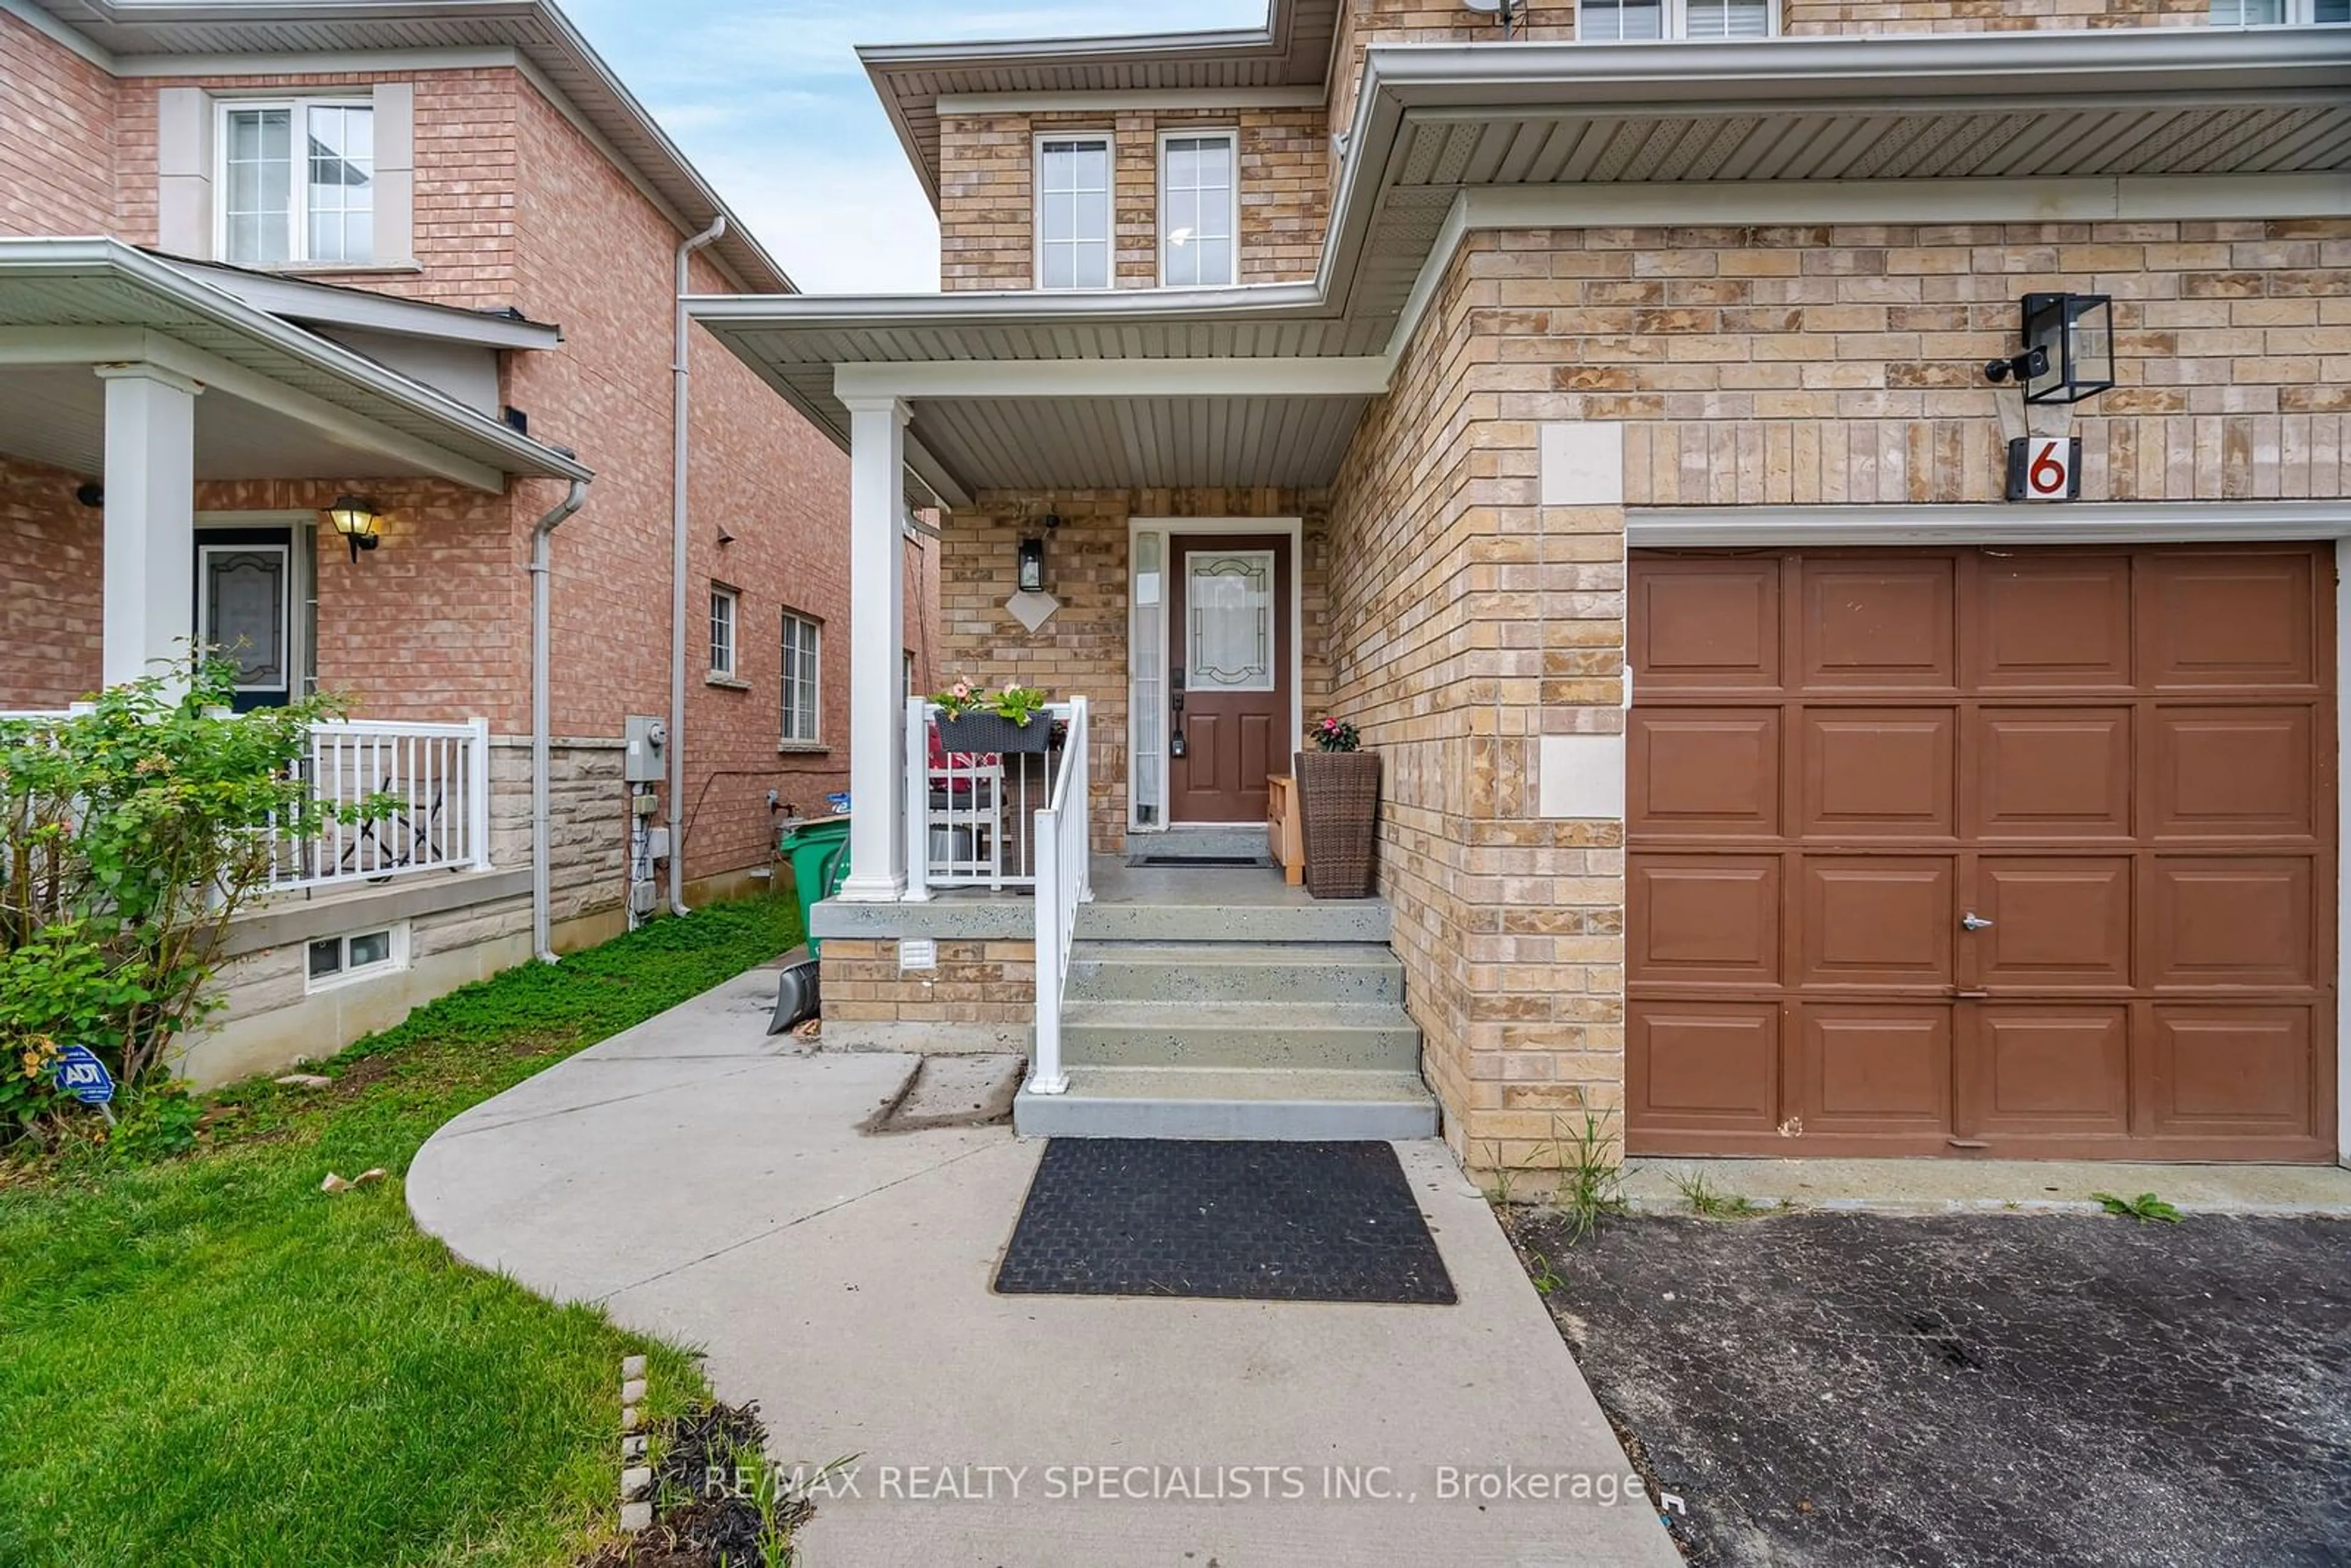 Home with brick exterior material for 6 Flatfield Way, Brampton Ontario L6P 1N7